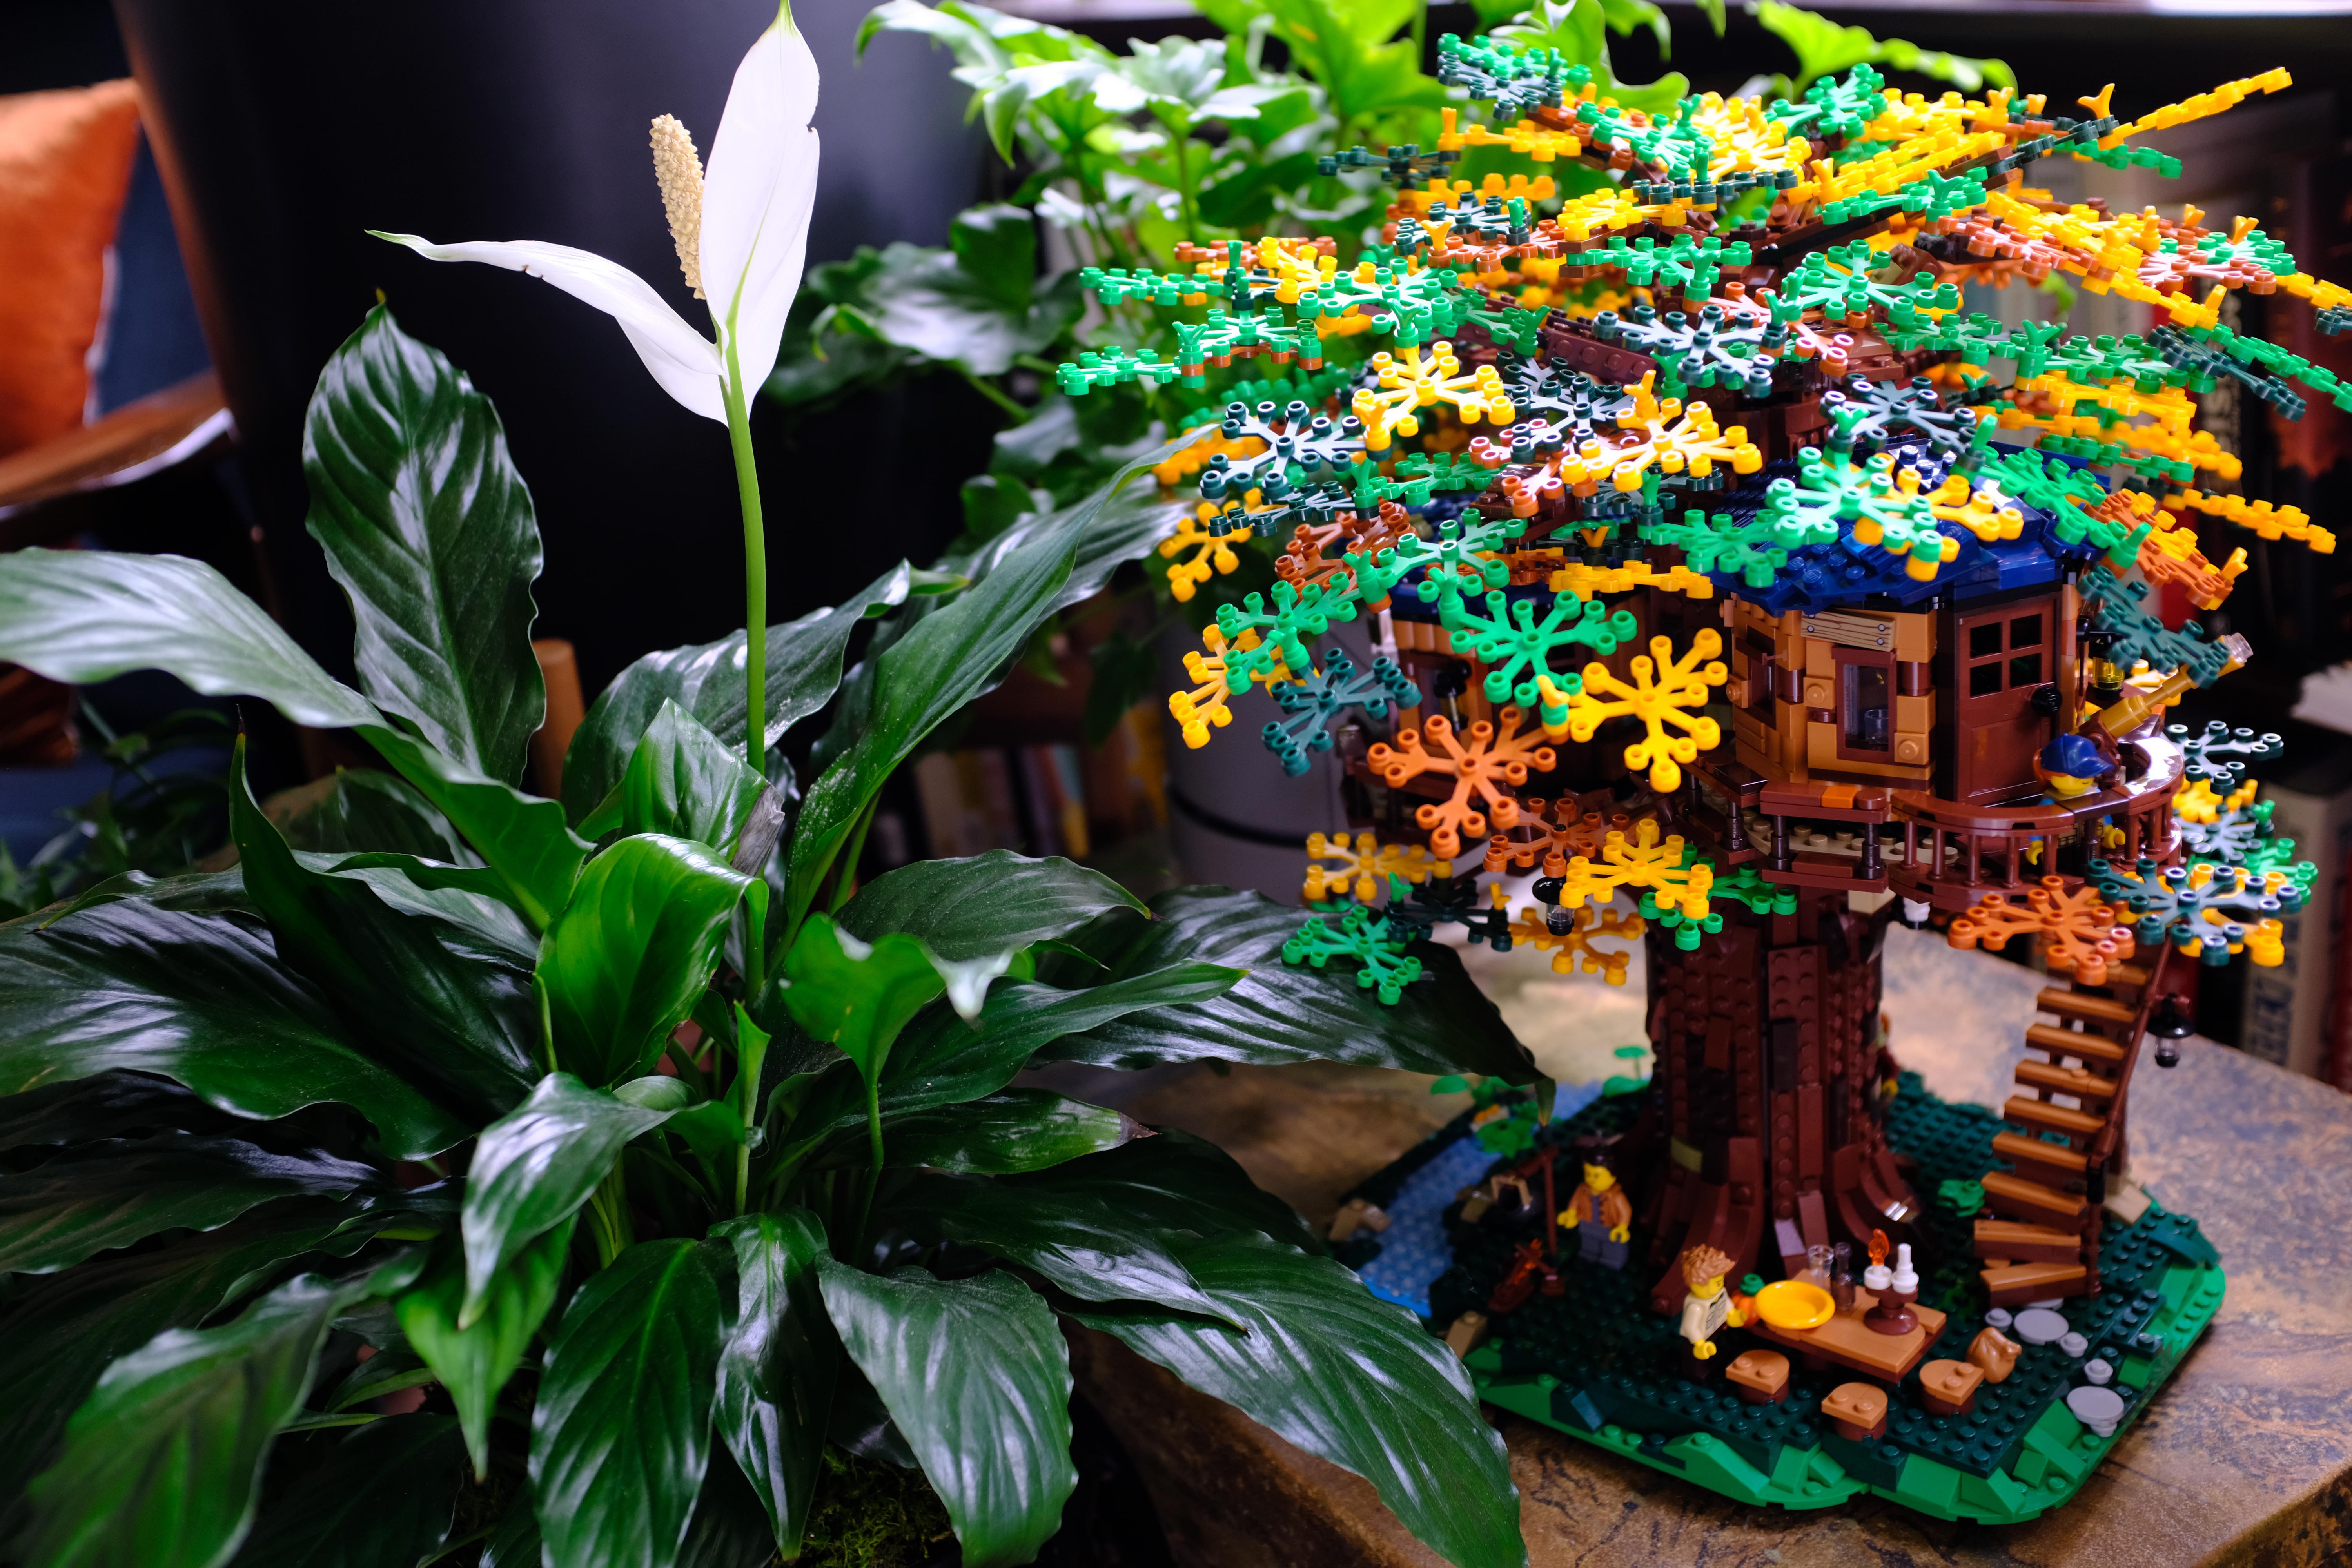 Photograph of a blooming Peace lily plant and a colorful Lego treehouse